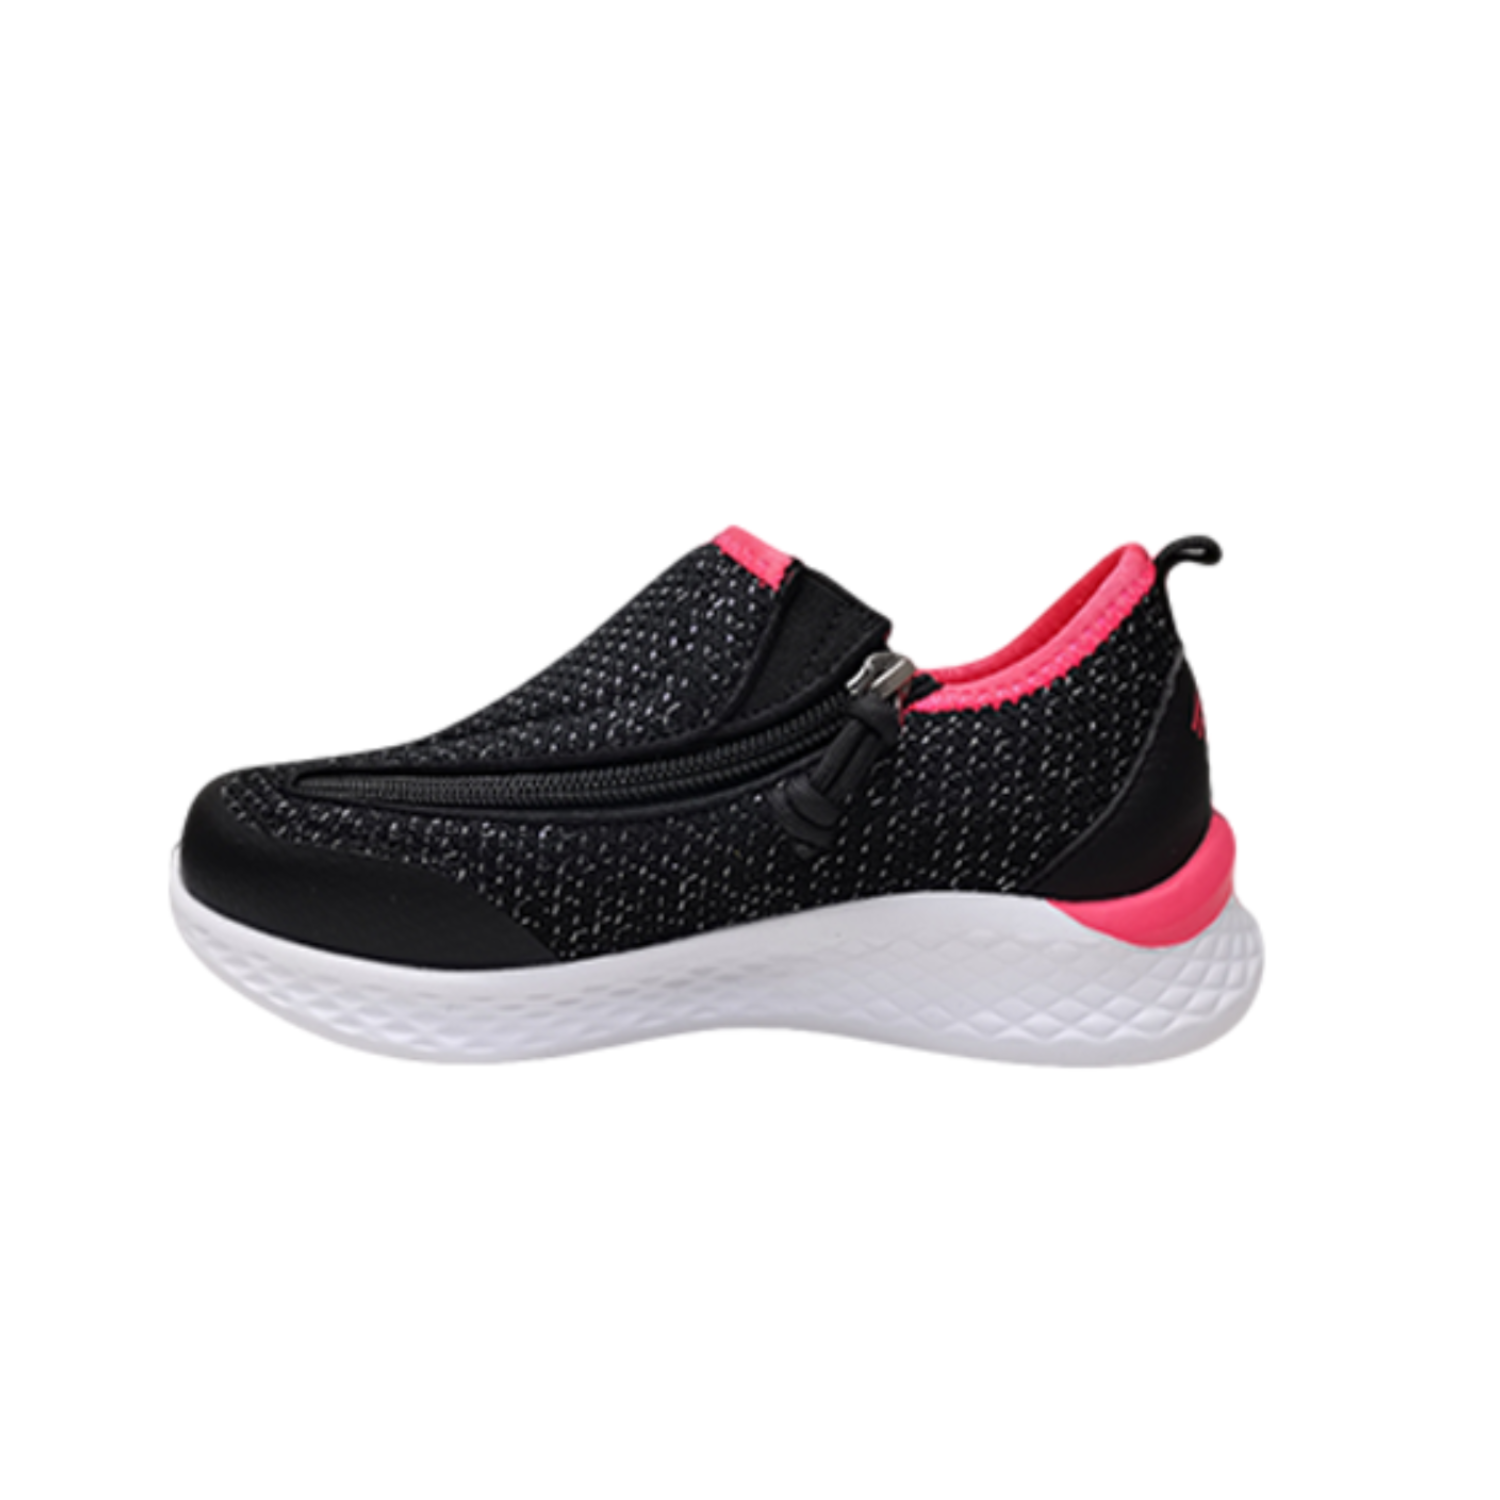 Black kids shoe with white bottom and hot pink accents and side zipper access.